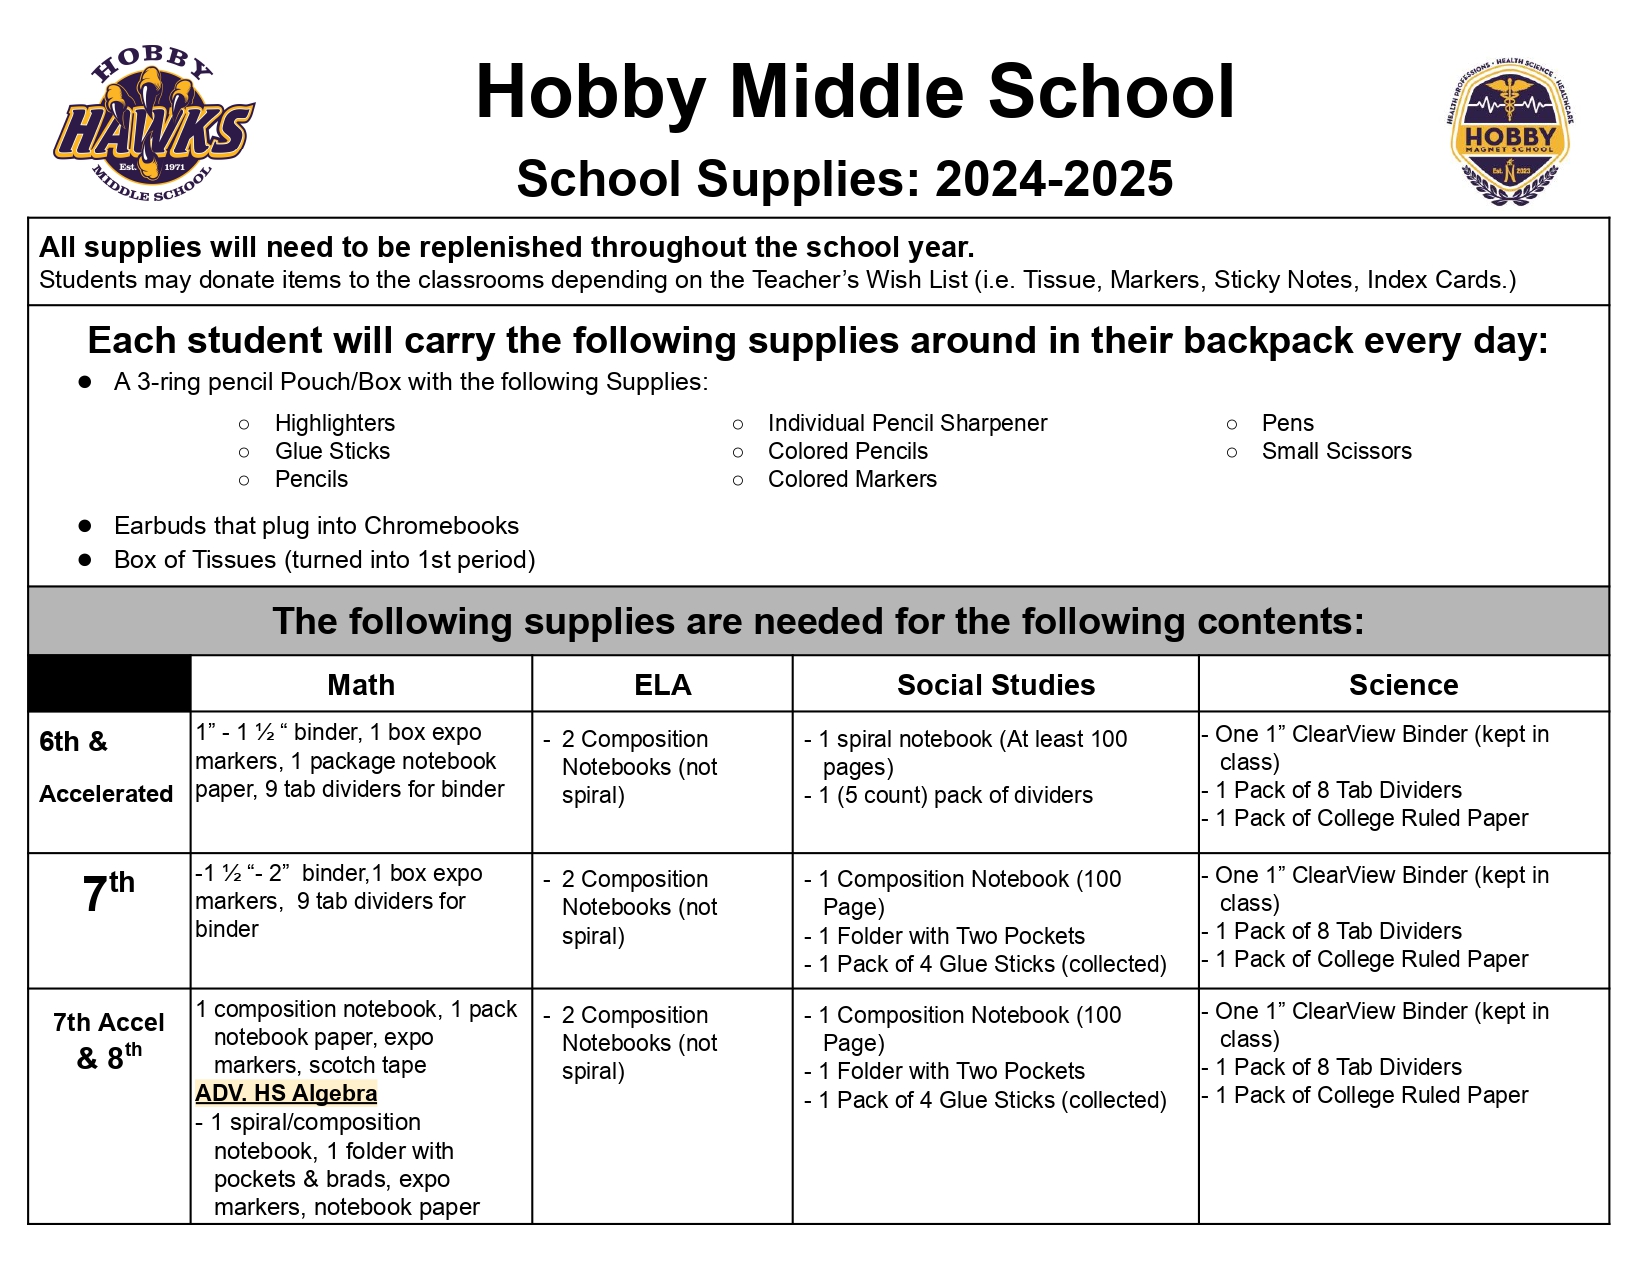 Supply List for 24-25 school year for Hobby Middle School